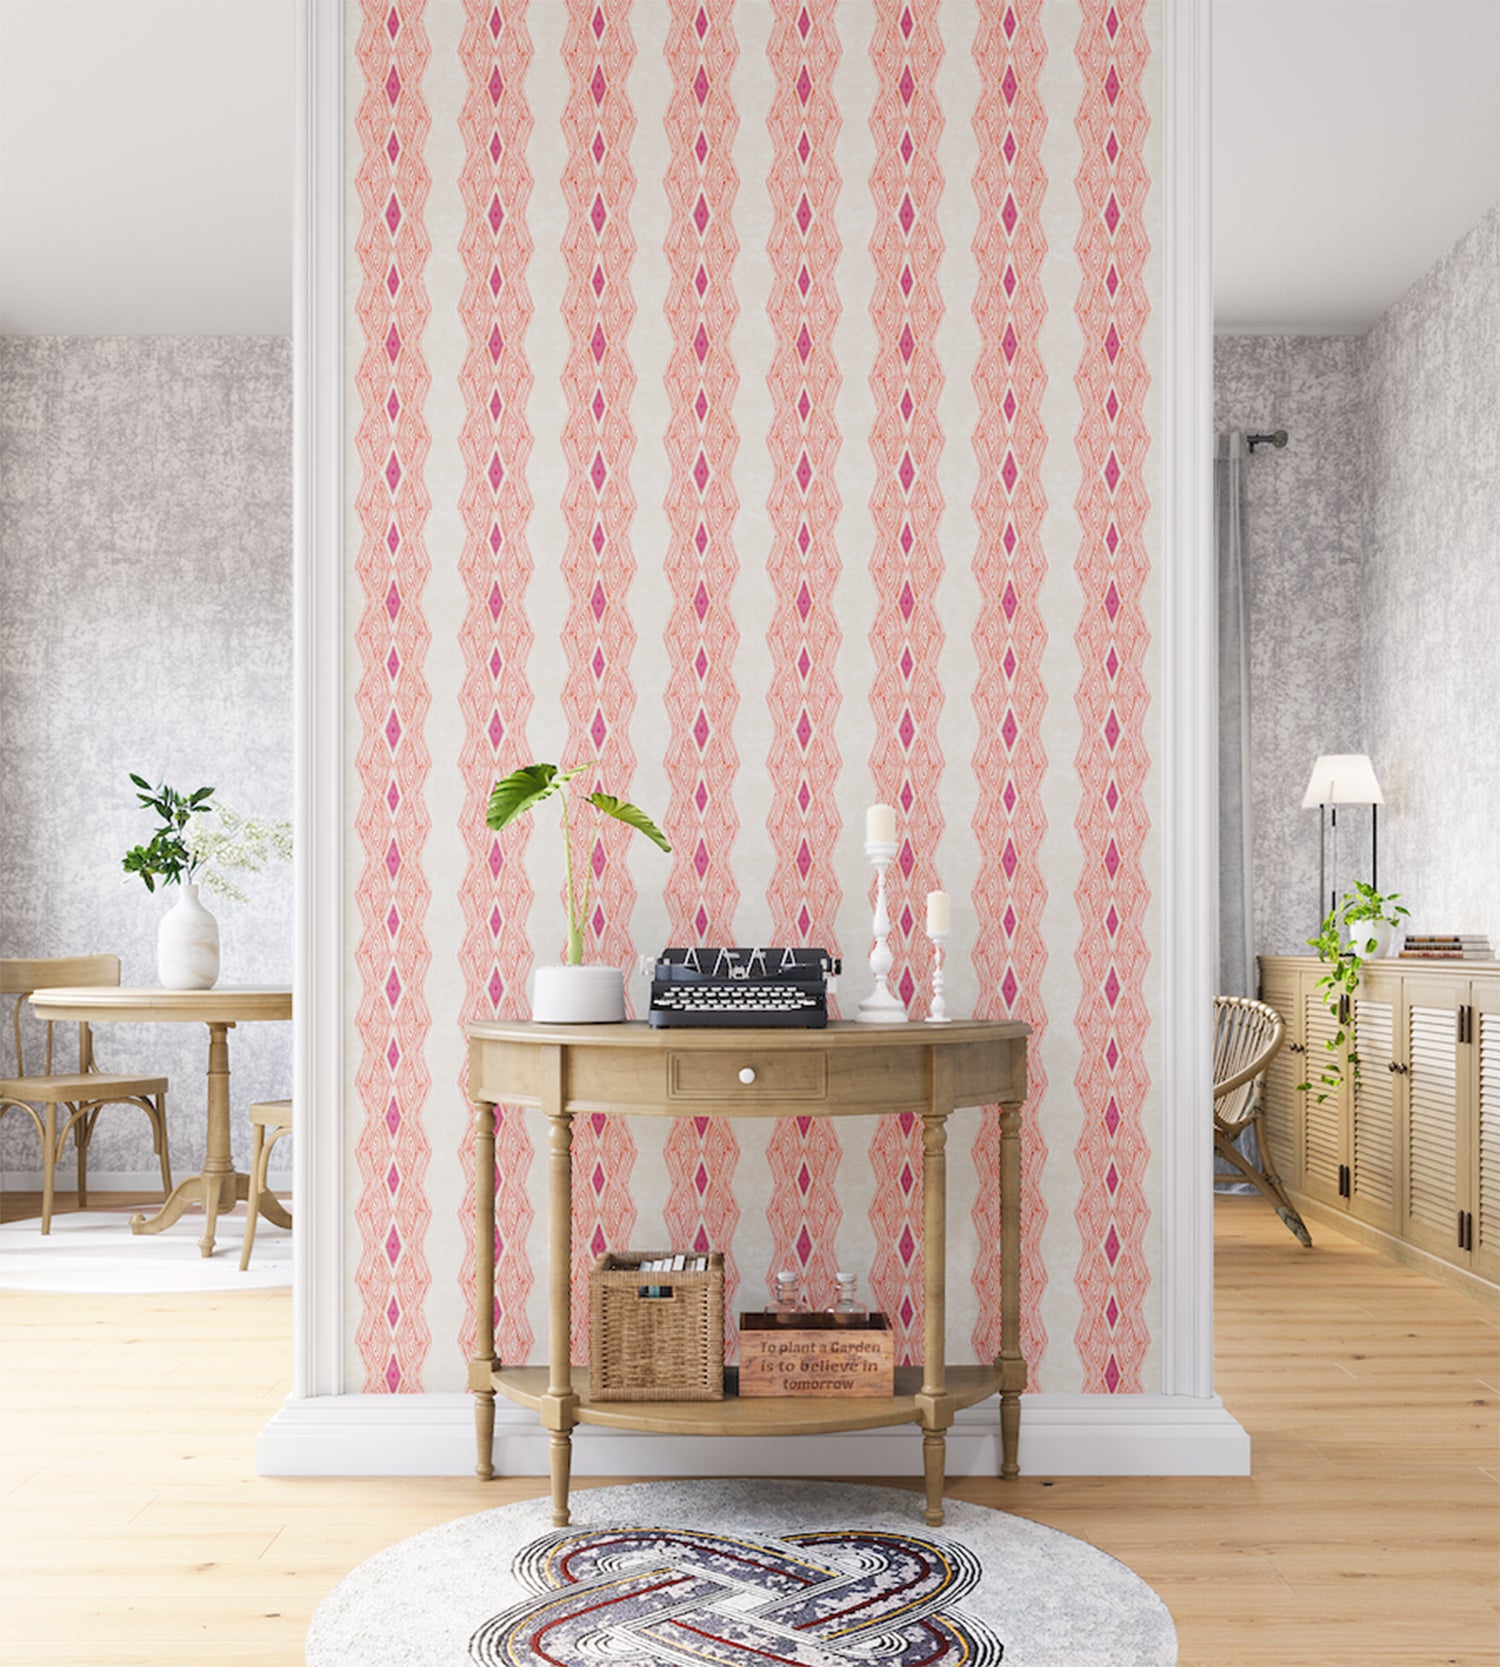 A maximalist living space with an accent wall papered in an intricate diamond stripe print in pink, orange and cream.